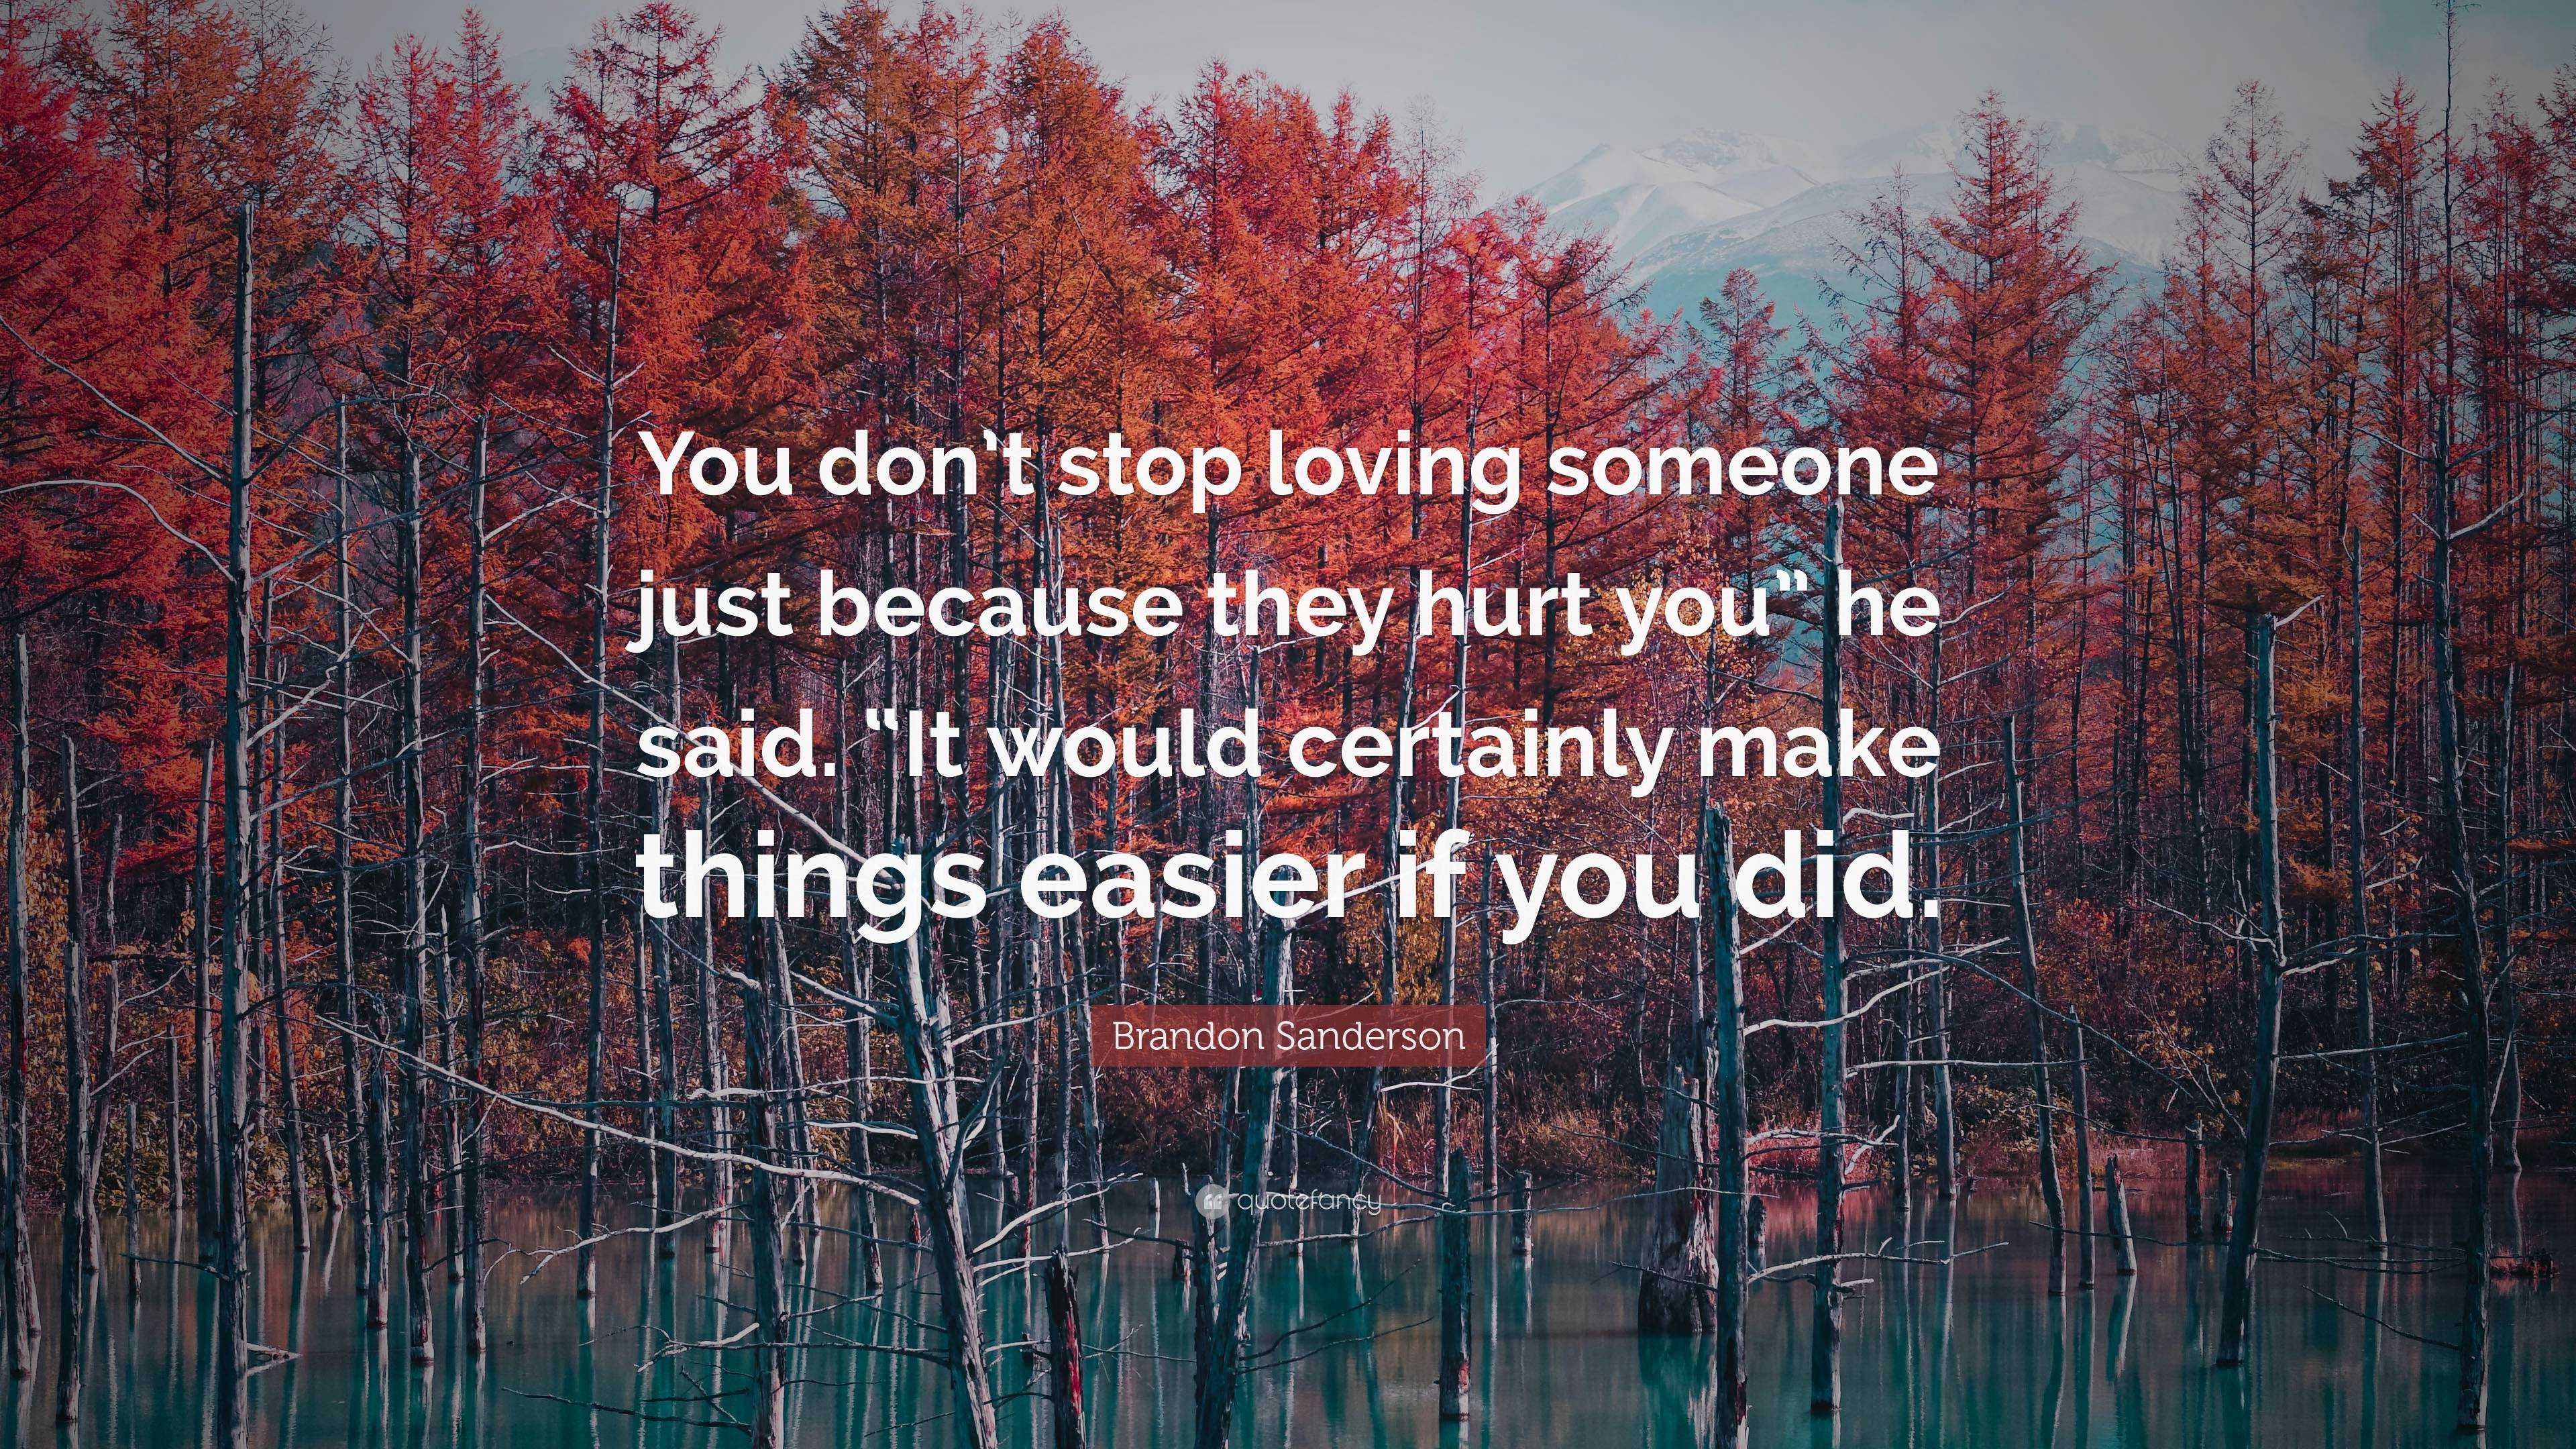 Brandon Sanderson Quote You Don T Stop Loving Someone Just Because They Hurt You He Said